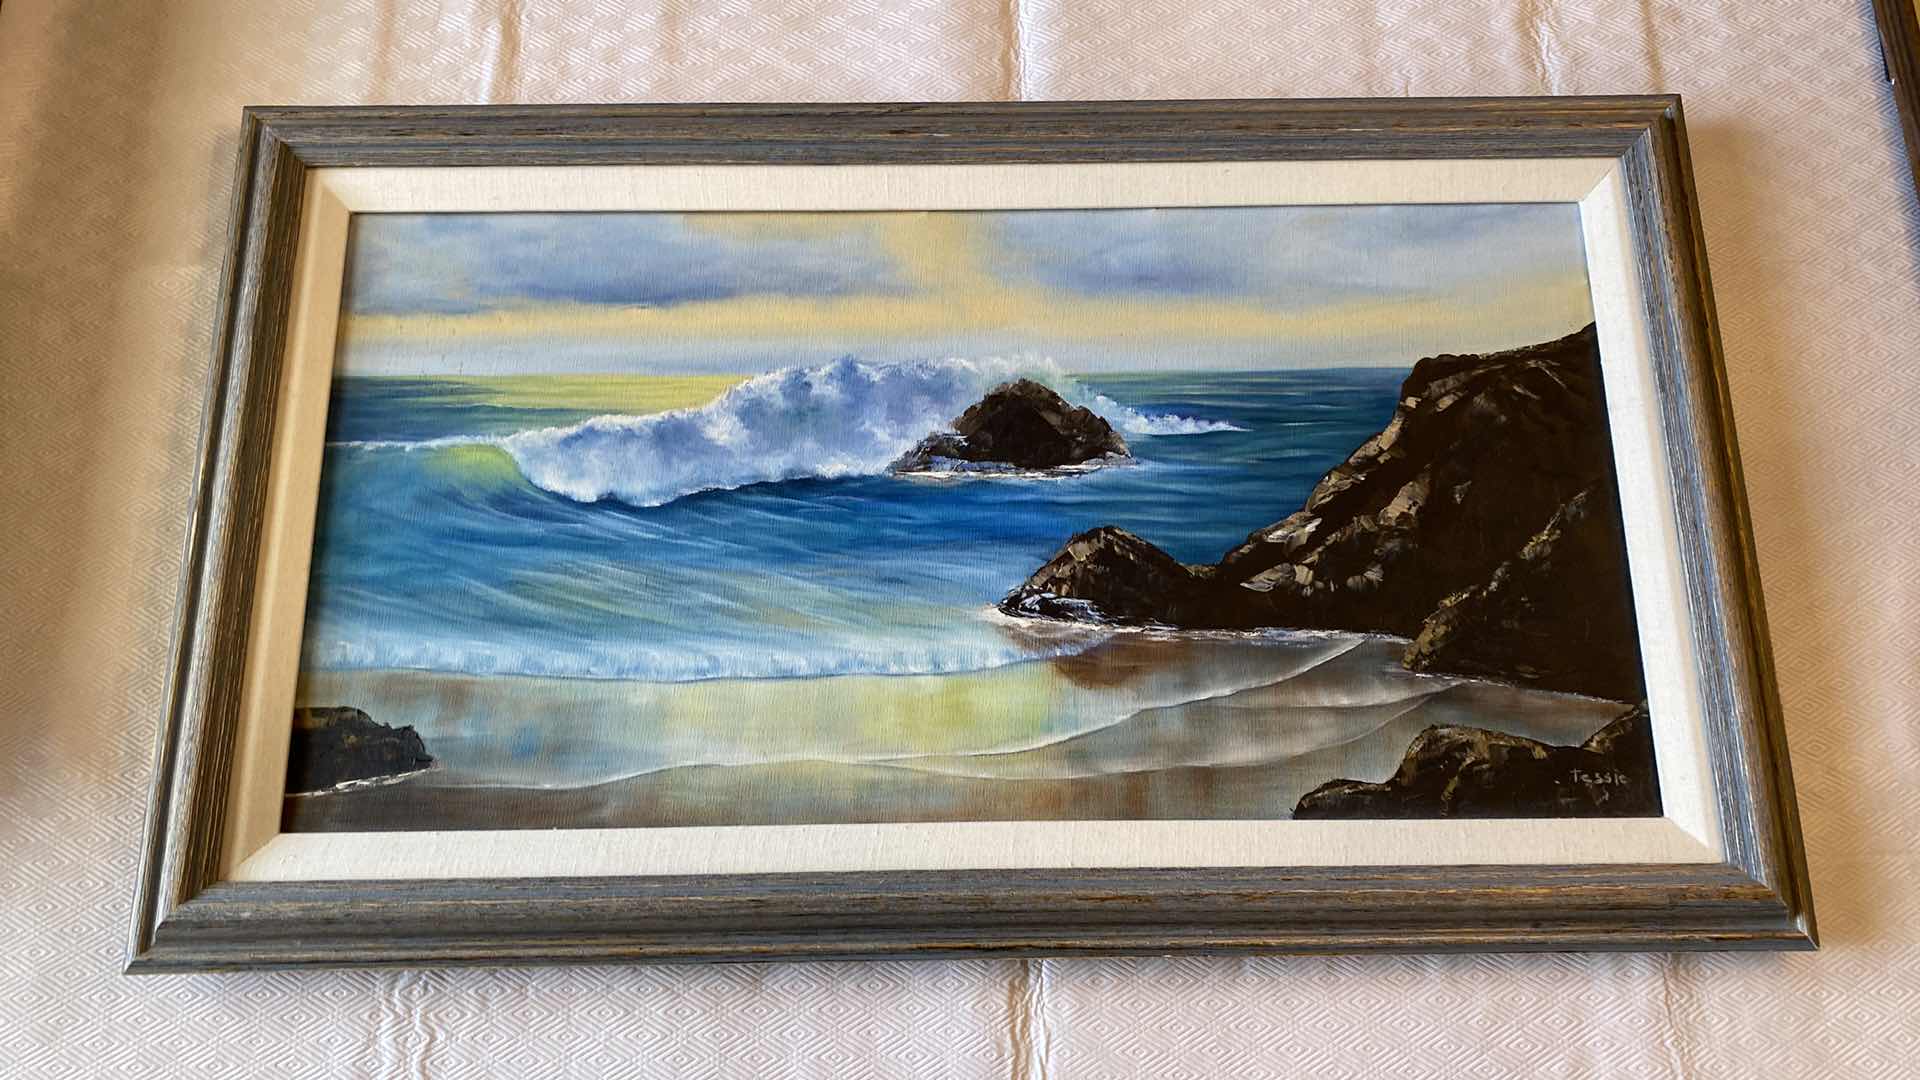 Photo 1 of FRAMED SIGNED SEASCAPE ON CANVAS 35” x 20”